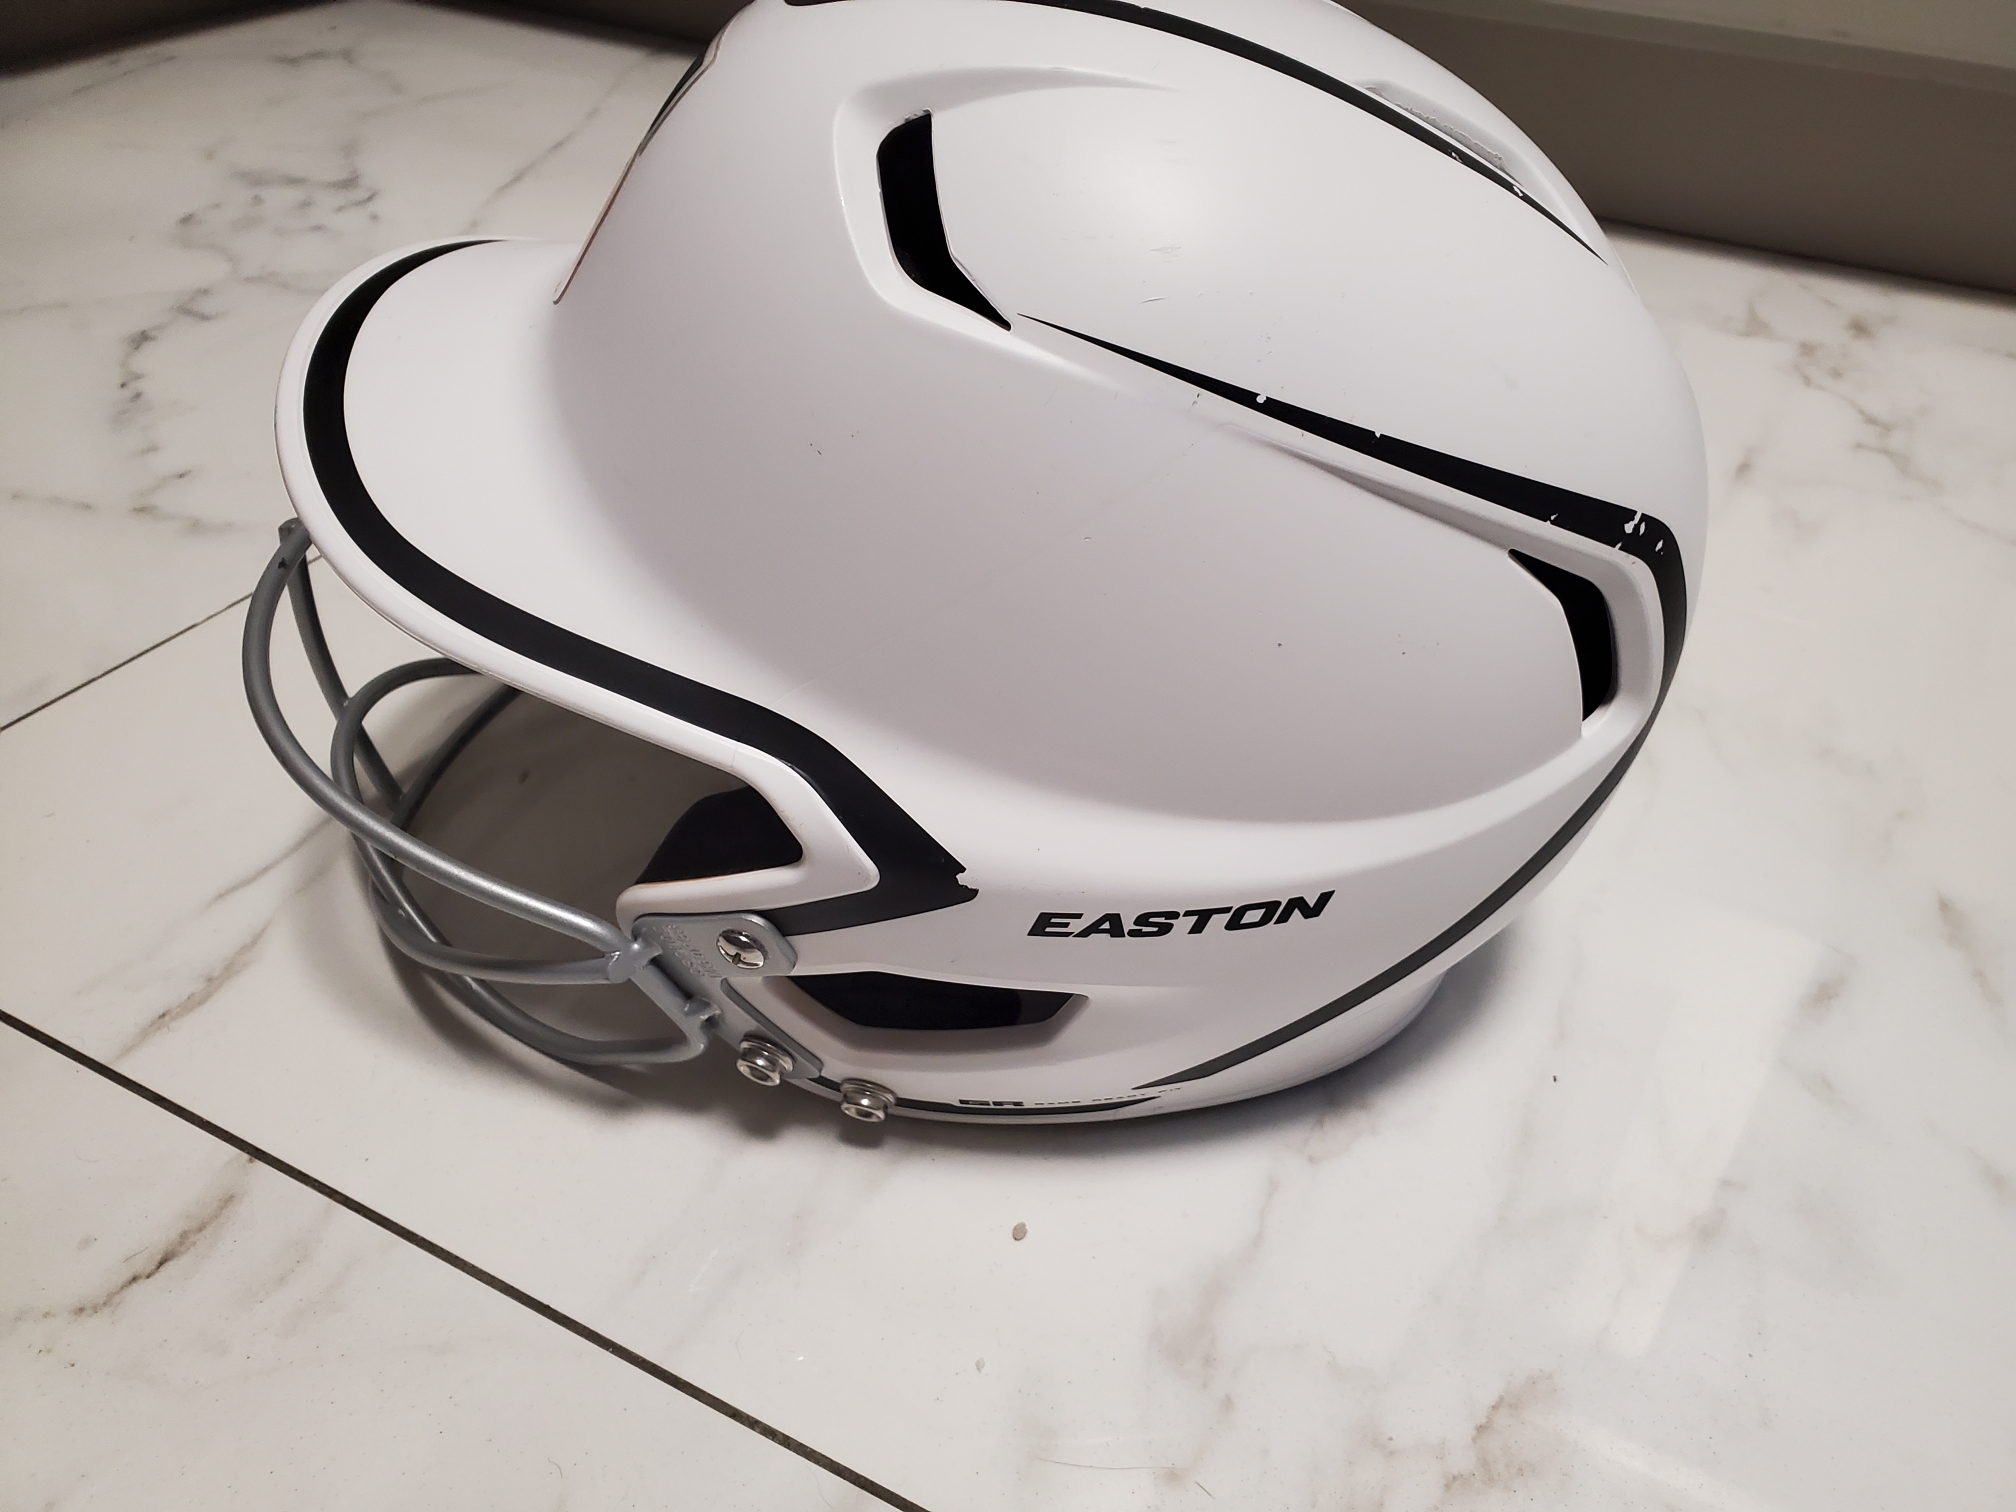 Easton Z5 2.0 Batting Helmet with Face Cage 6 1/2" - 7 1/8"